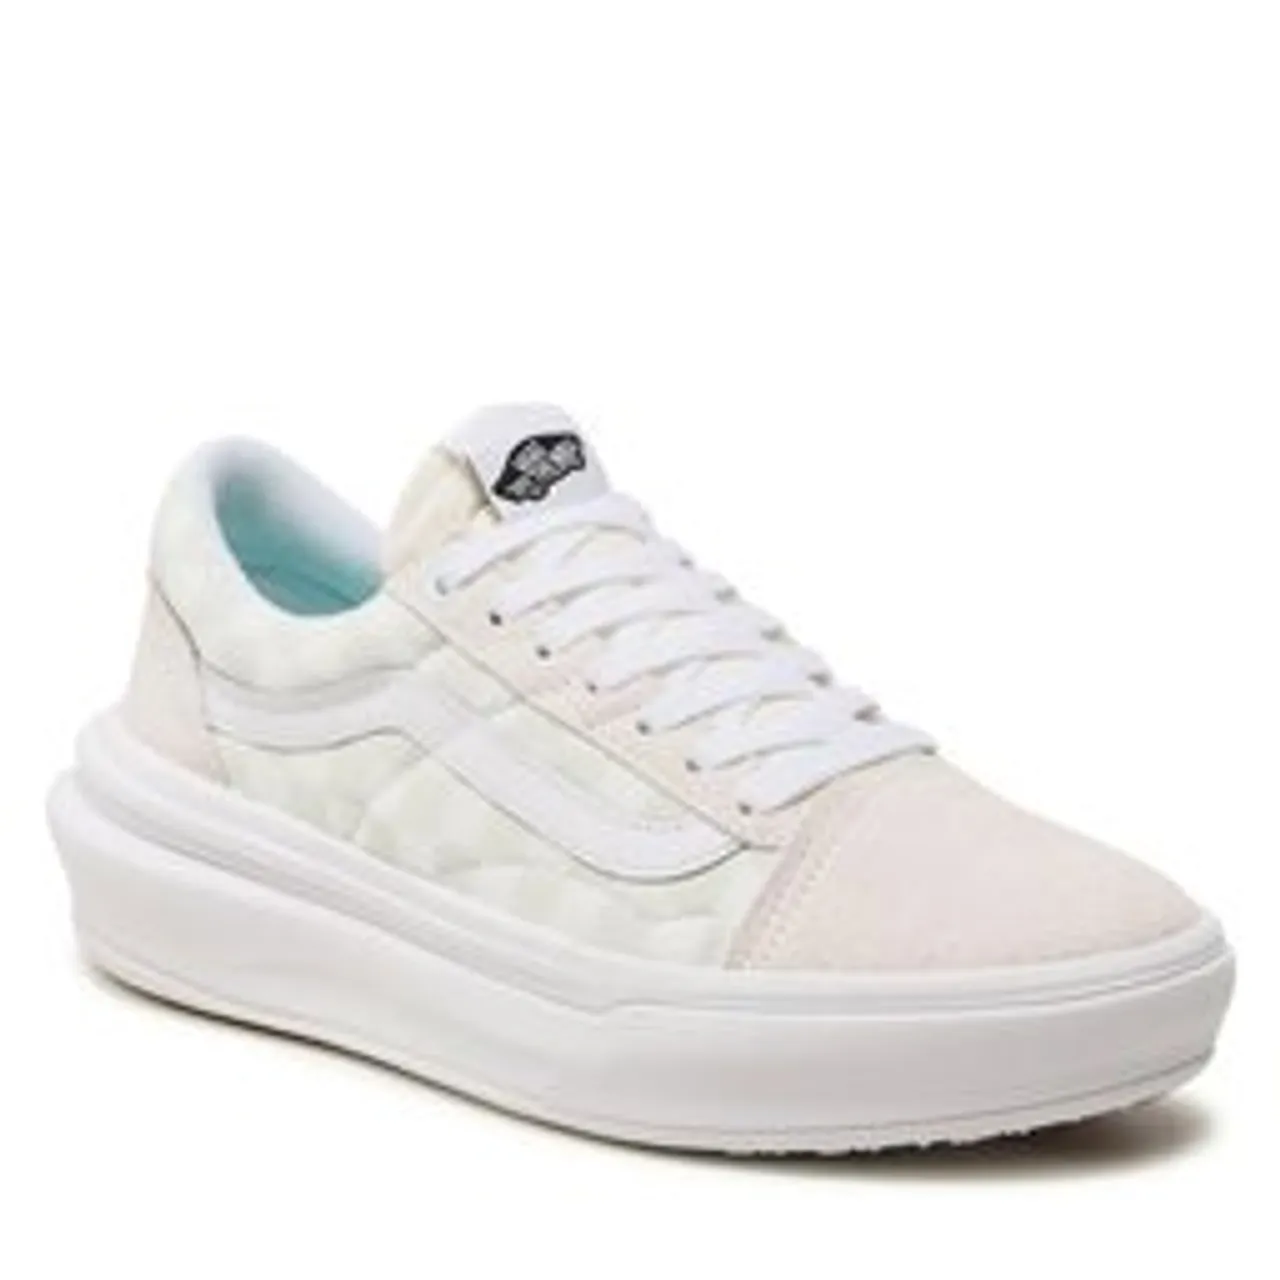 Sneakers aus Stoff Vans Old Skool Over VN0A7Q5ETDC1 Checkerboard White/Checke